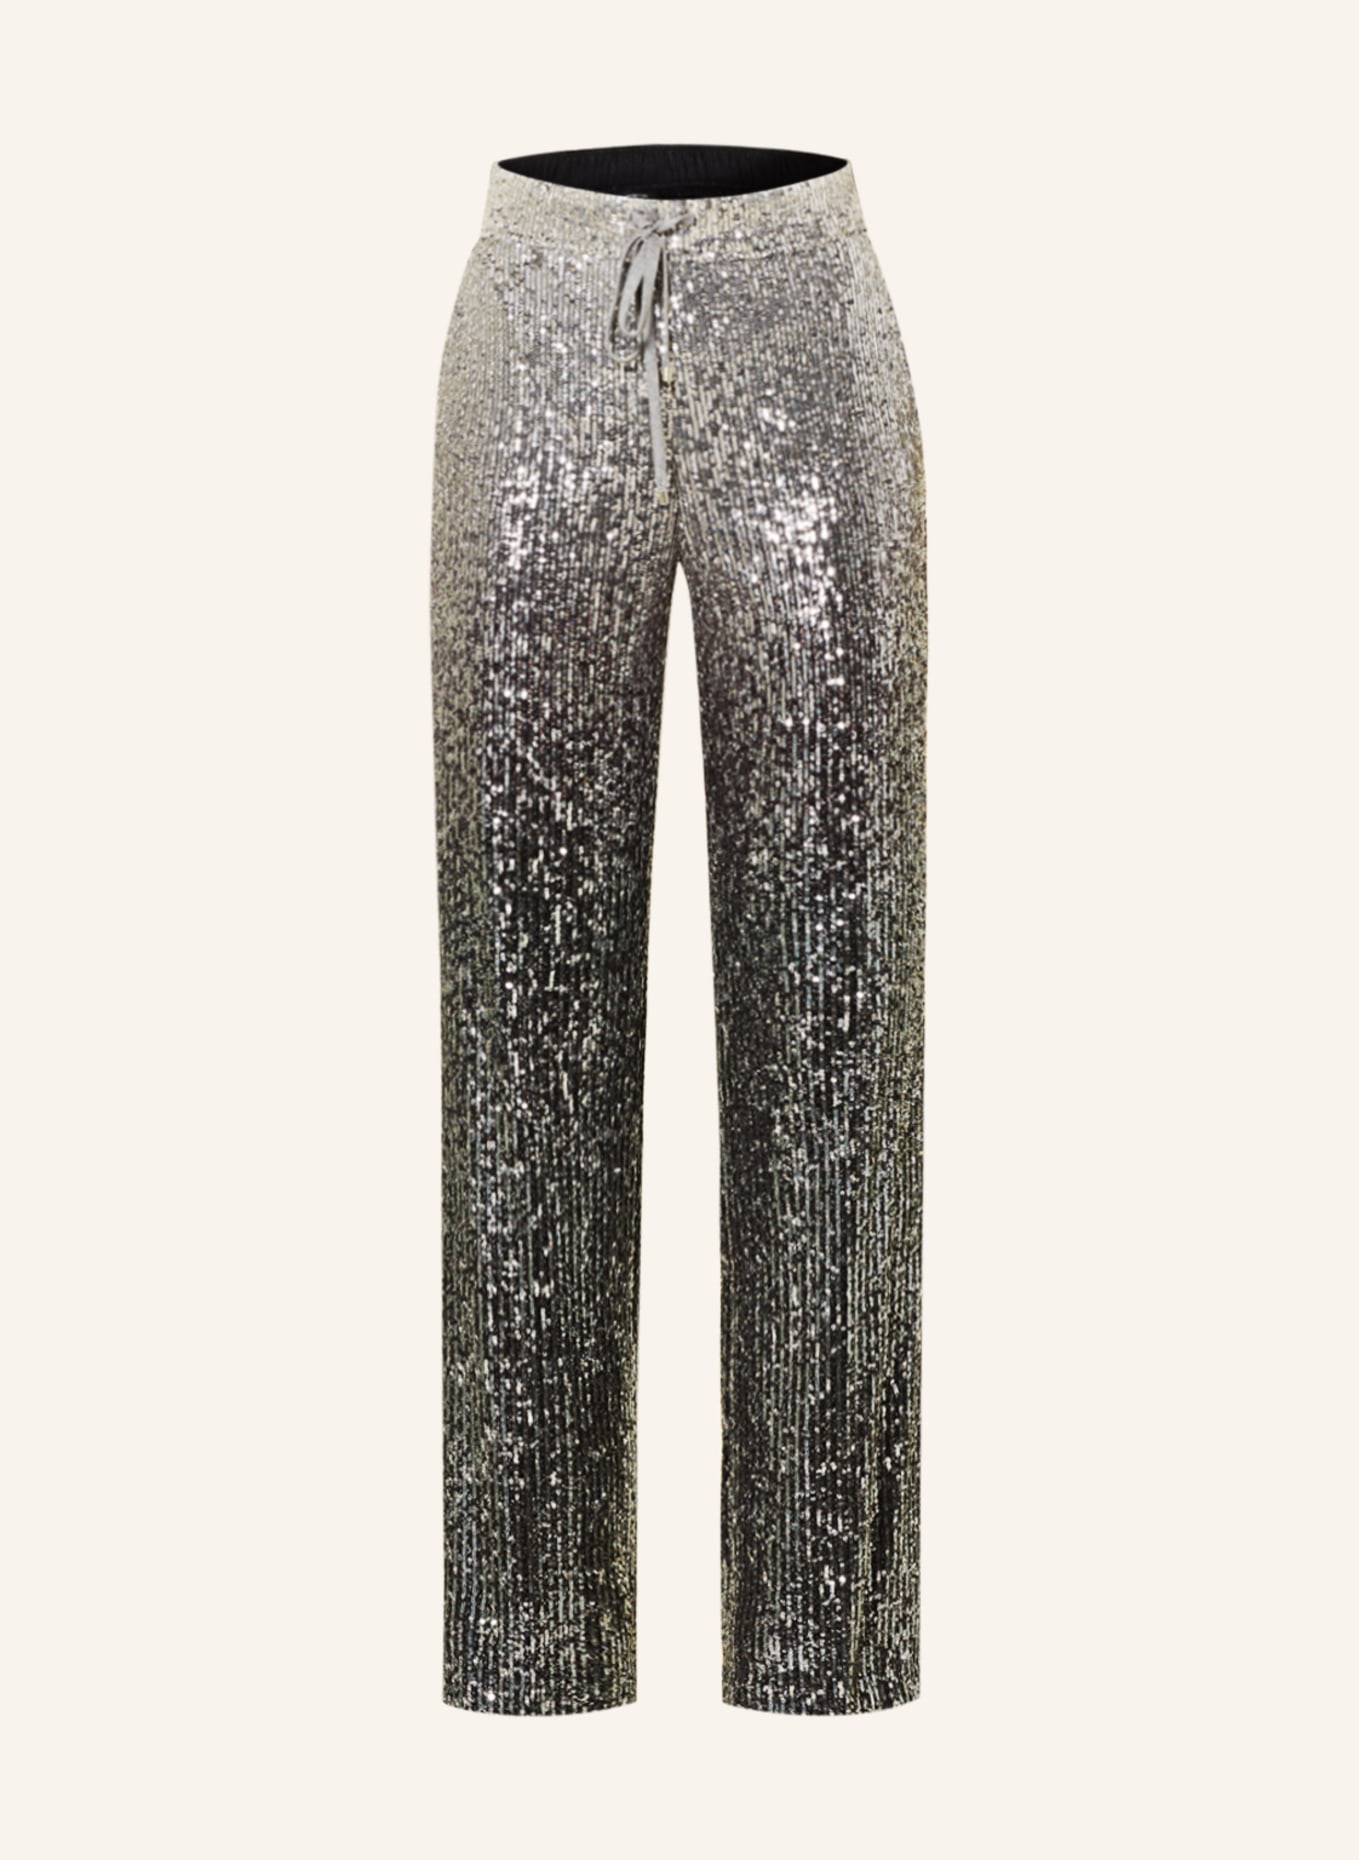 CAMBIO Trousers AVRIL with sequins, Color: GRAY/ BLACK/ SILVER (Image 1)